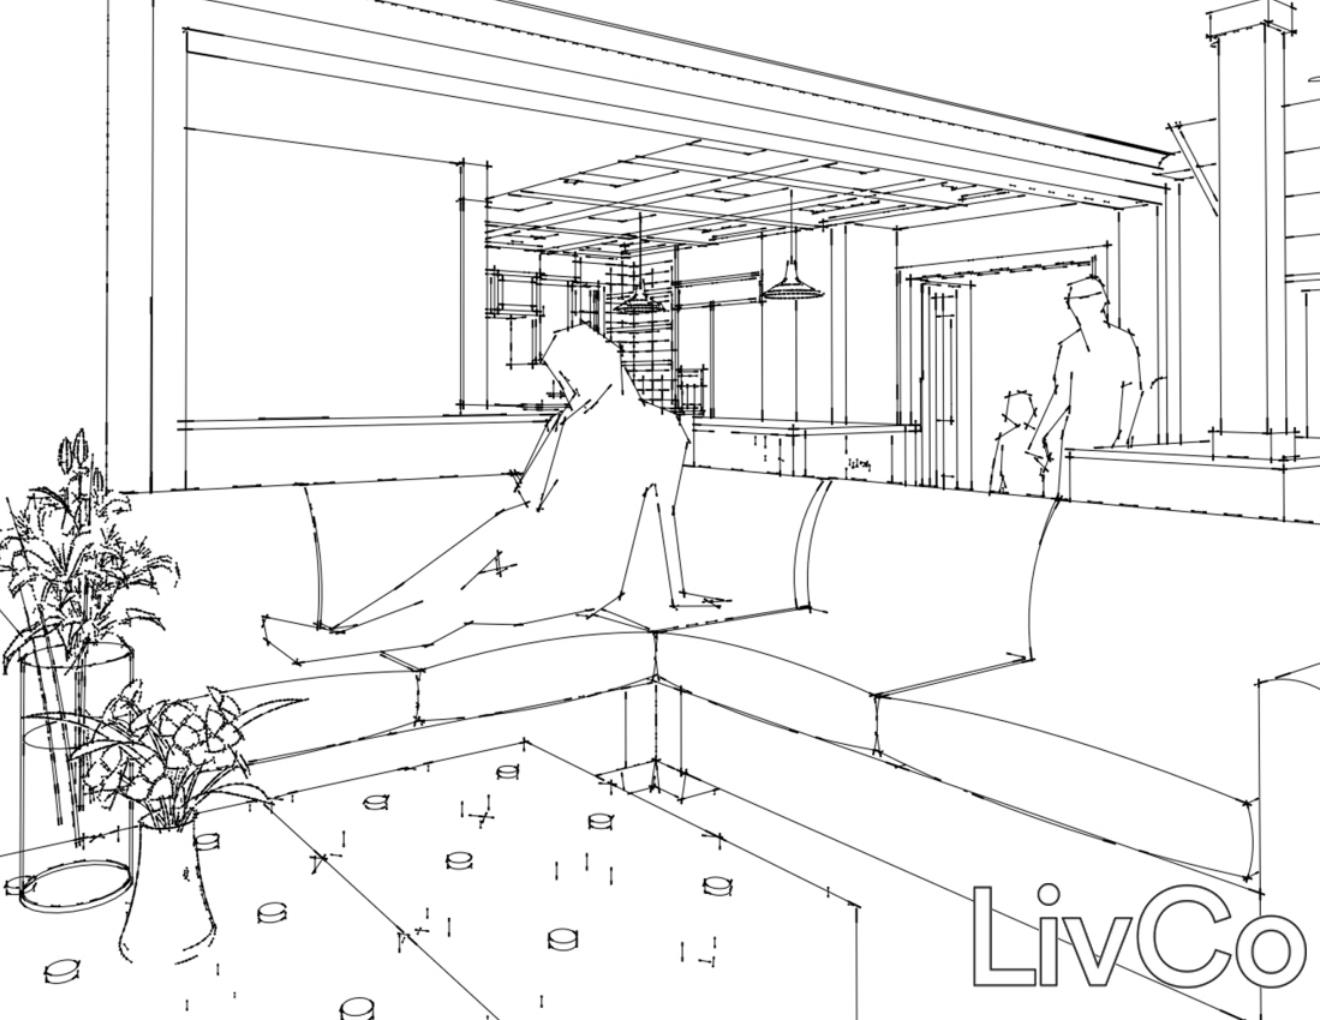 Perspective line drawing of people in a living room and kitchen